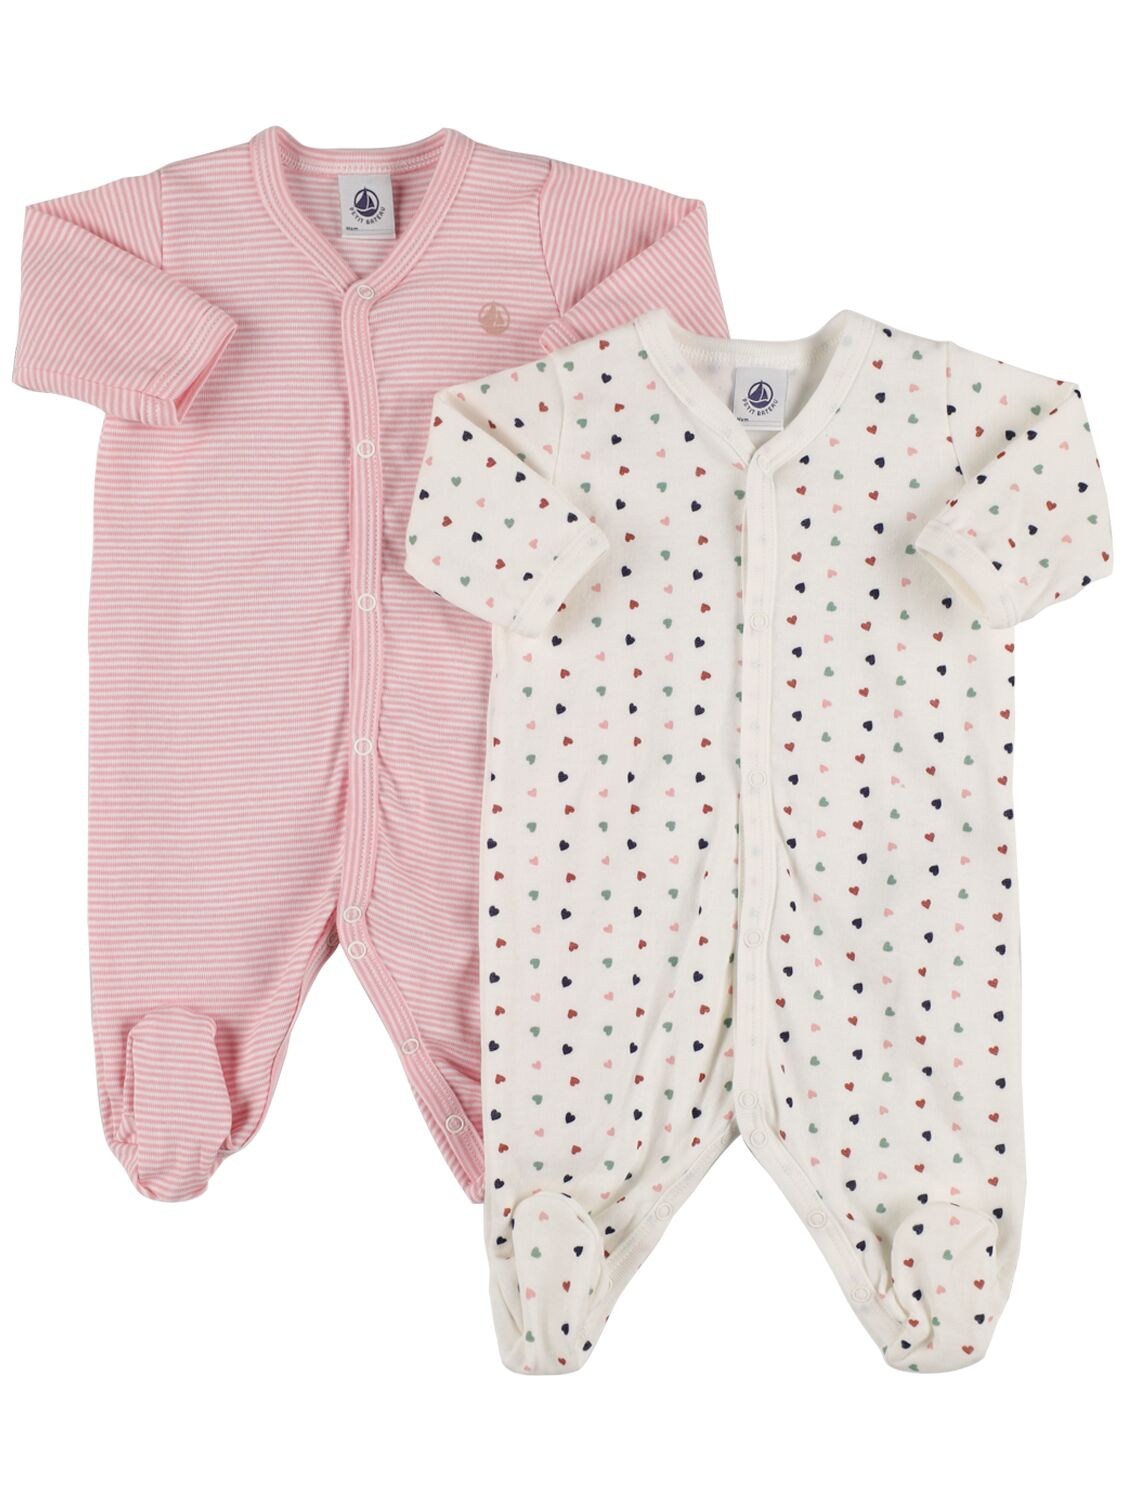 Image of Set Of 2 Printed Cotton Rompers